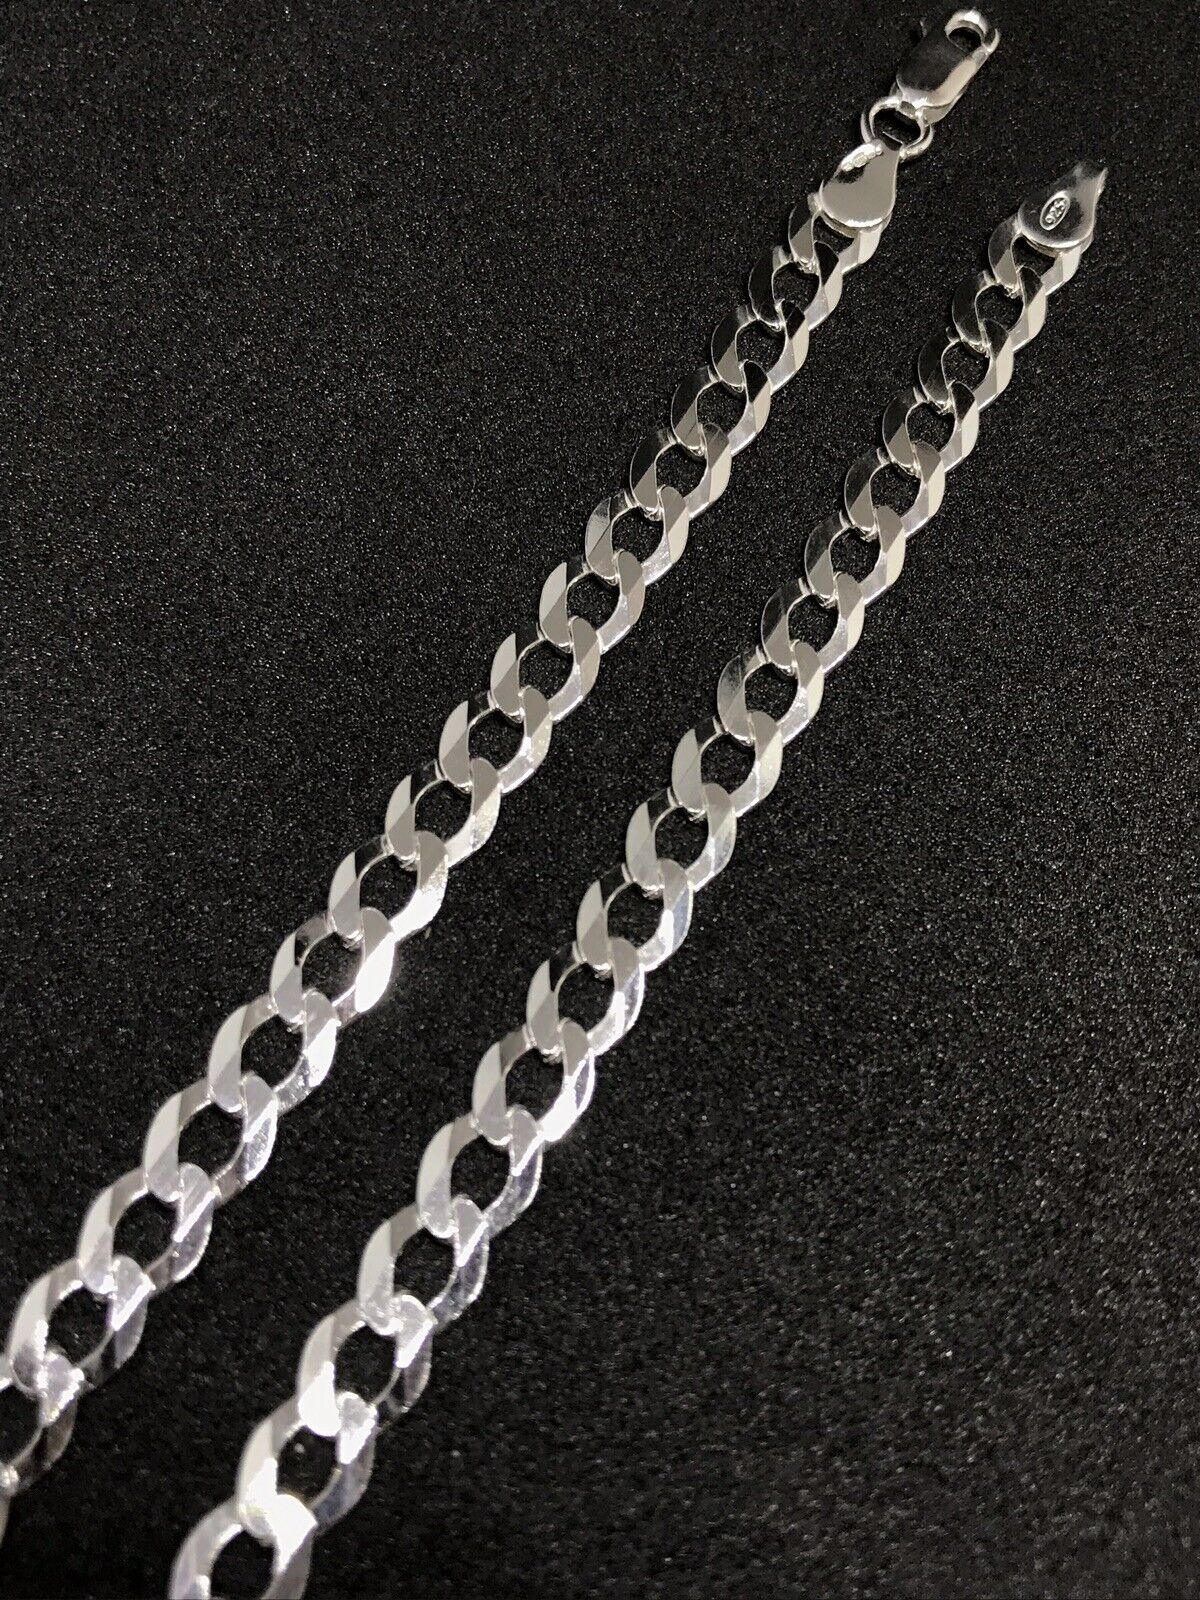 SOLID 925 Genuine Sterling Silver 6mm Men&Women Open Flat Curb Chain Necklace Natychmiastowa dostawa